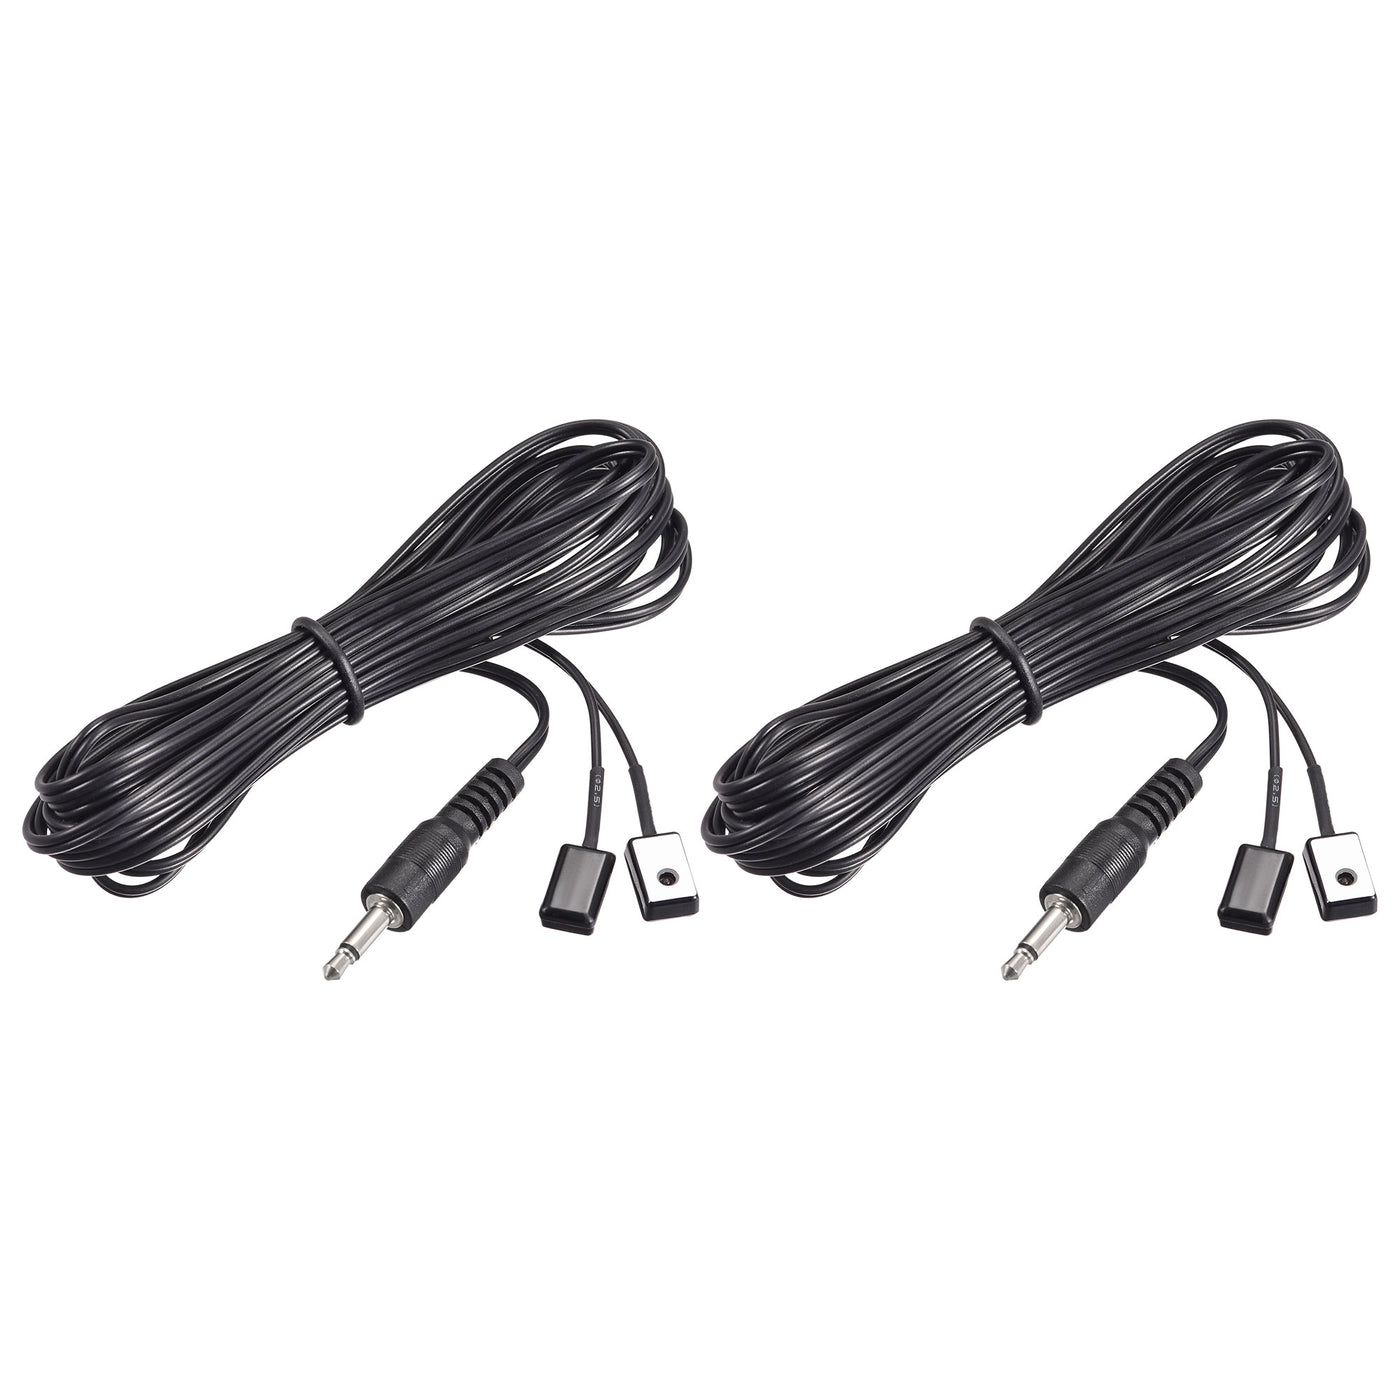 uxcell Uxcell IR Infrared Emitter Extension Cable 9.8ft Long 45 Degree Emission Angle 3.5mm Jack 2 Black Head 2pcs